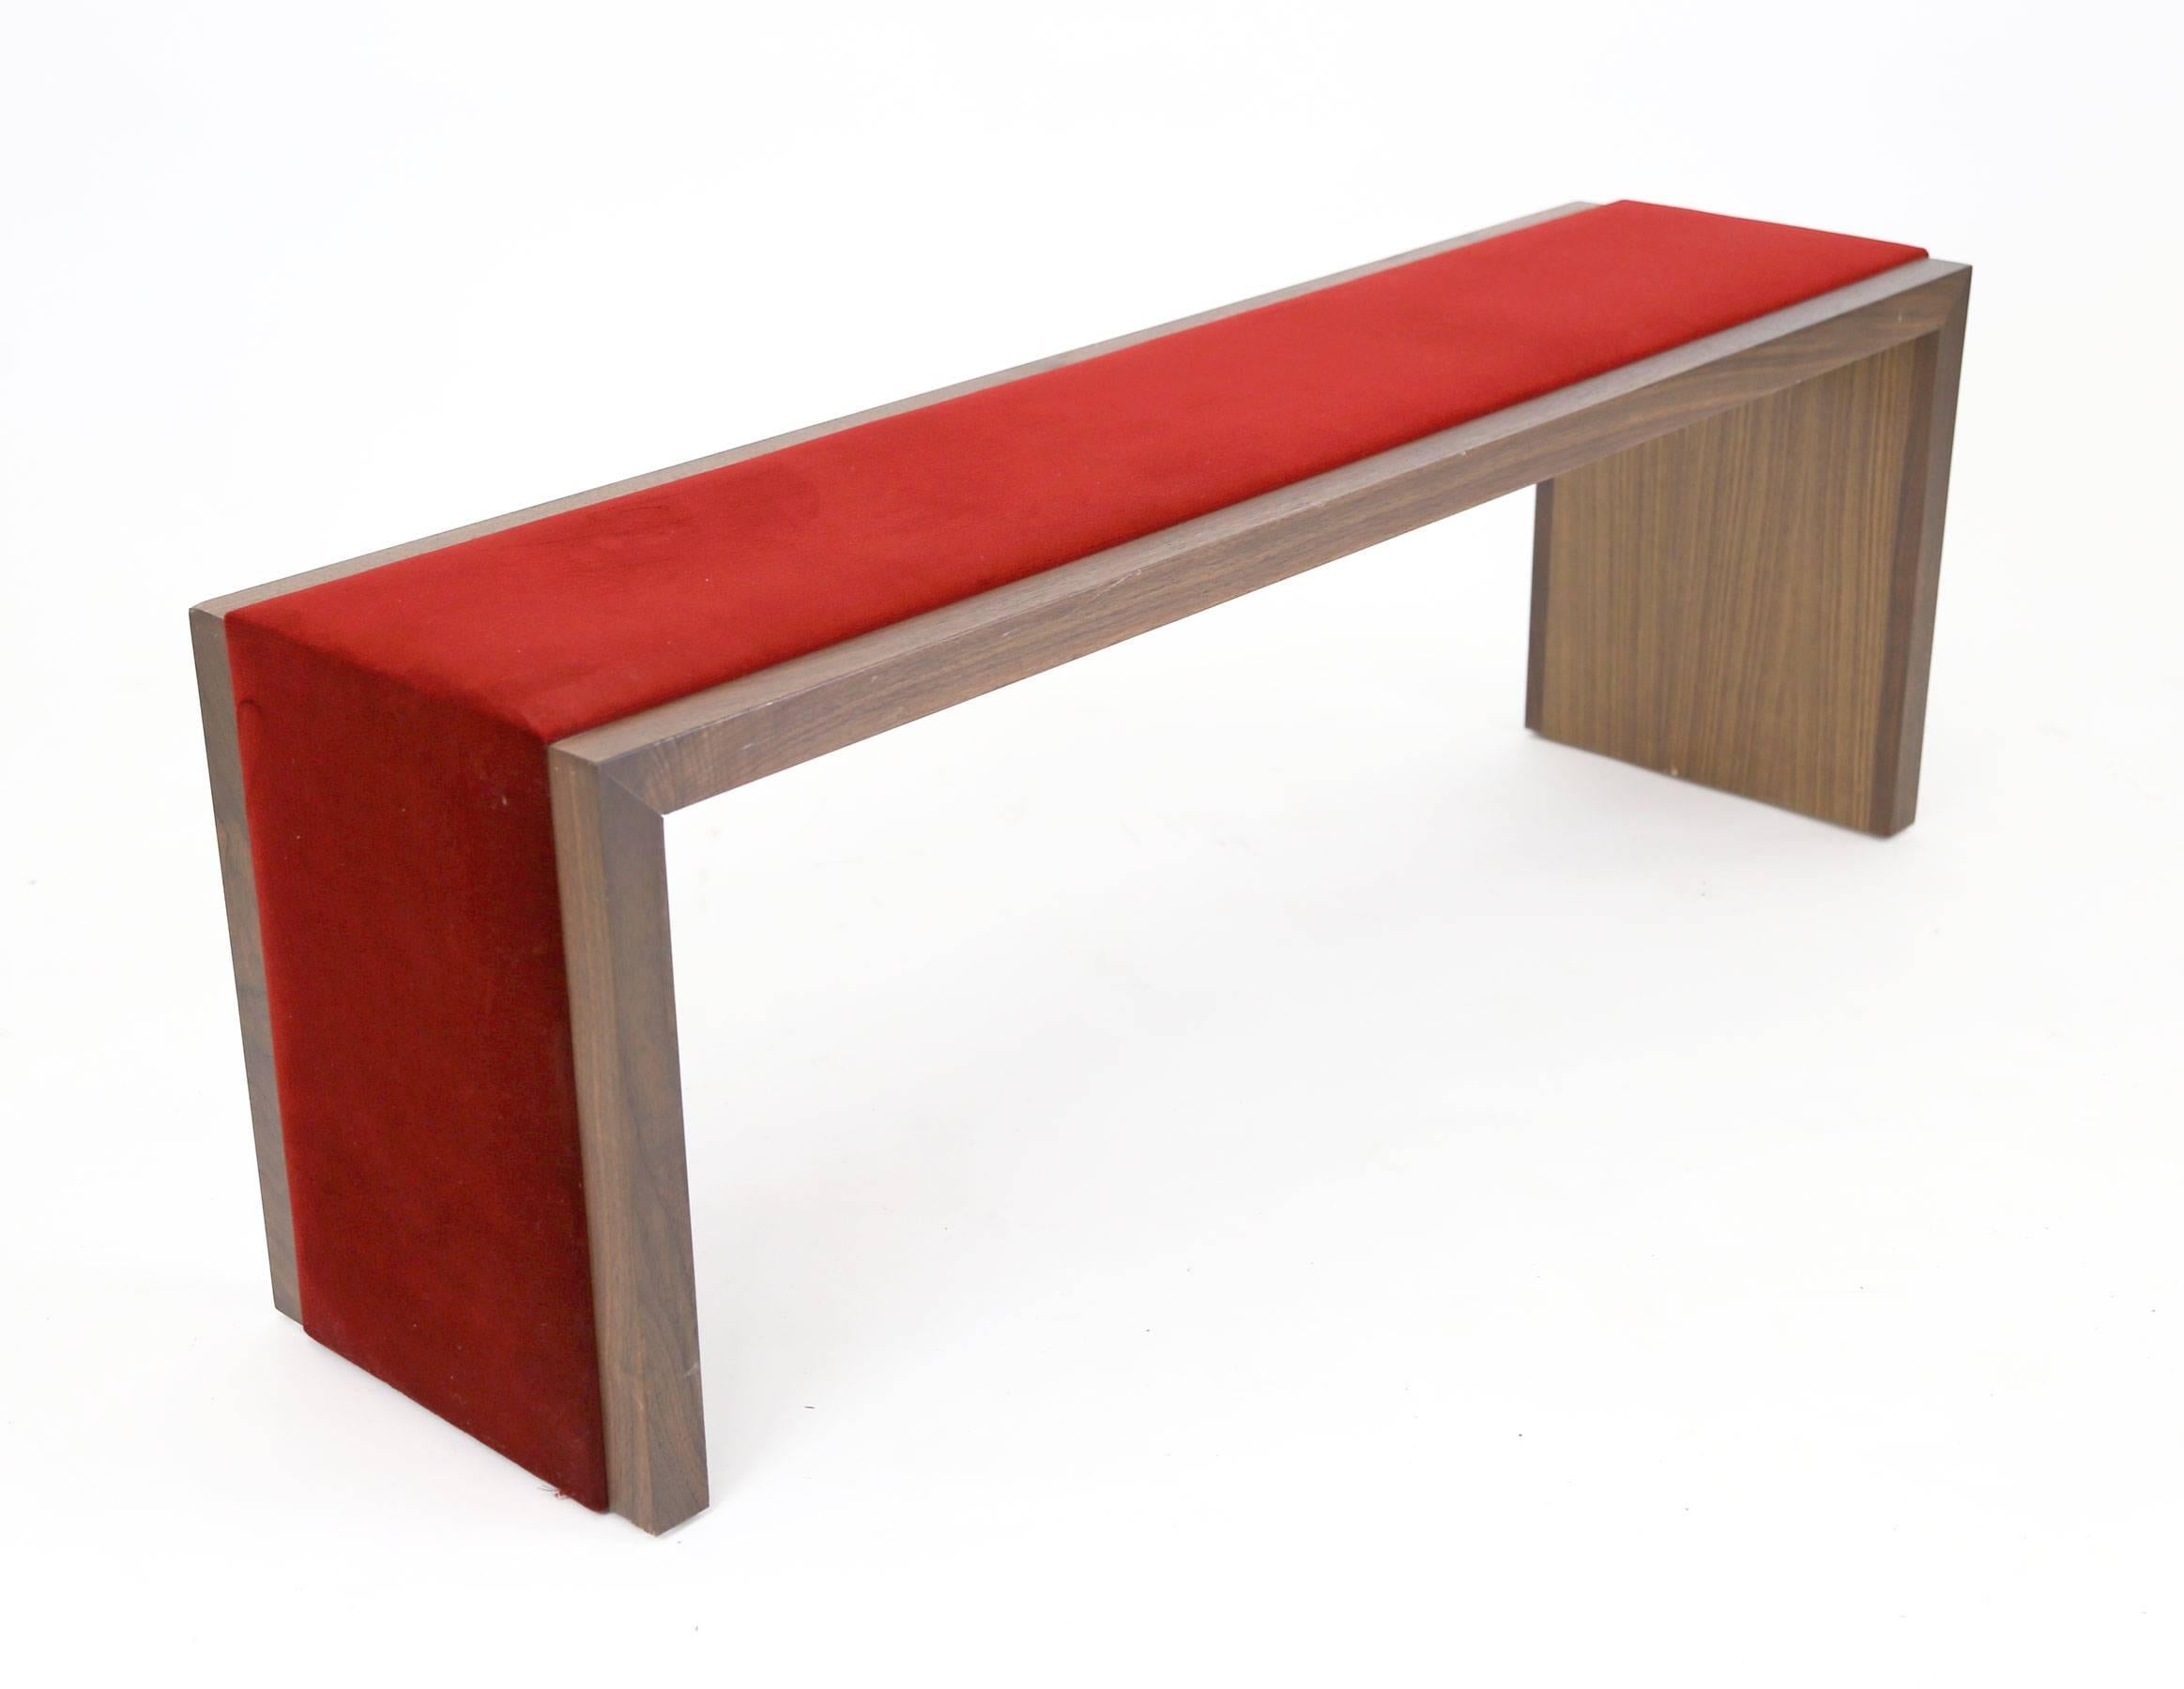 Walnut bench with a red velvet strip running across the seat and down both legs for a luxurious and interesting touch. Mitred corners, solid wood and underside is walnut veneer.